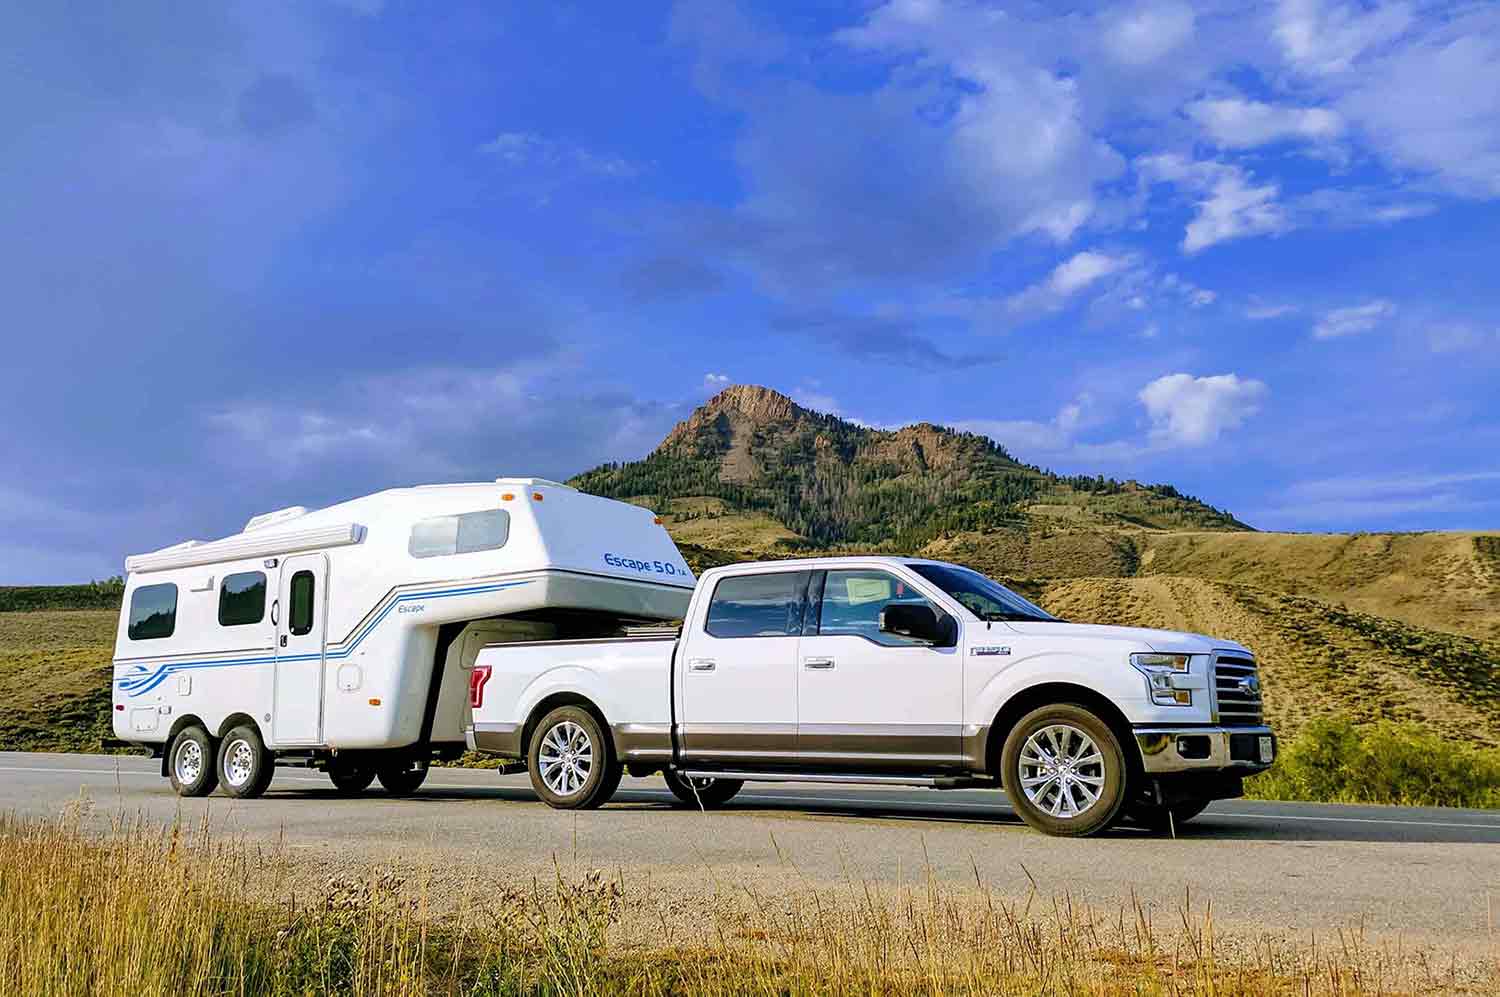 The 10 Best Small 5th Wheel Trailers You Can Buy Right Now - RV Talk How Much Does It Cost To Move A 5th Wheel